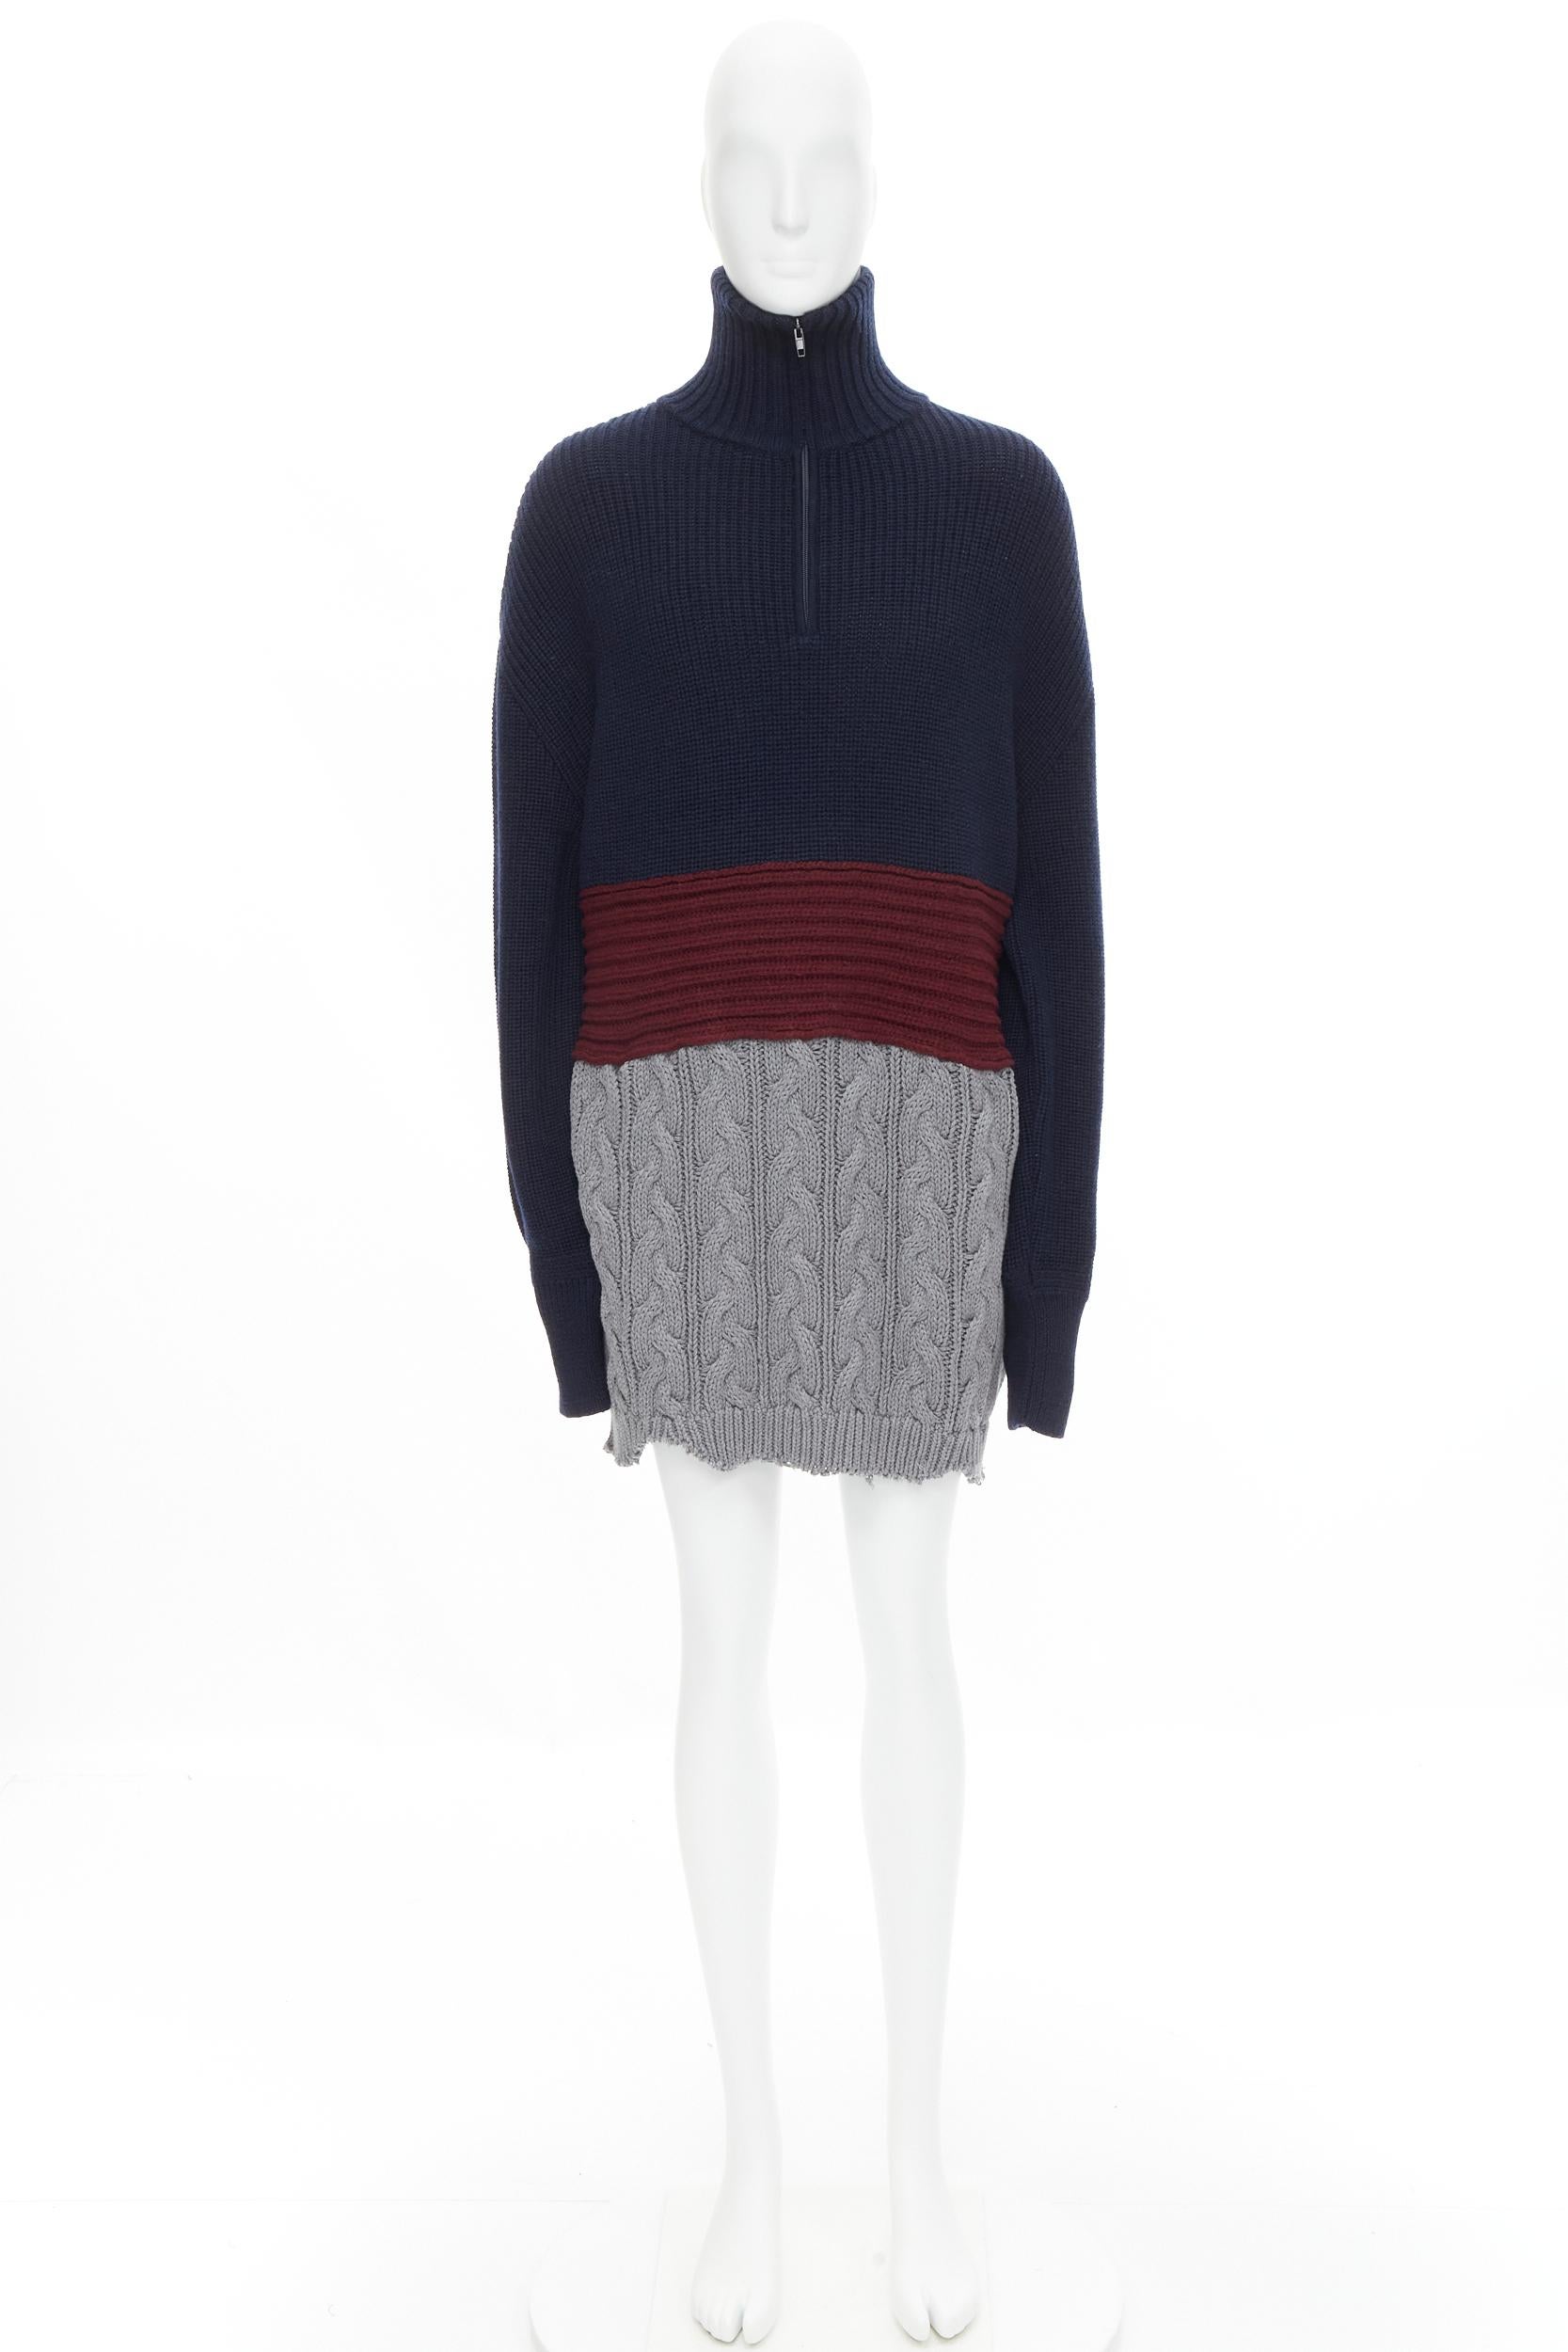 new BALENCIAGA 2019 Runway 3 layered cable knit distressed oversized sweater M en vente 7